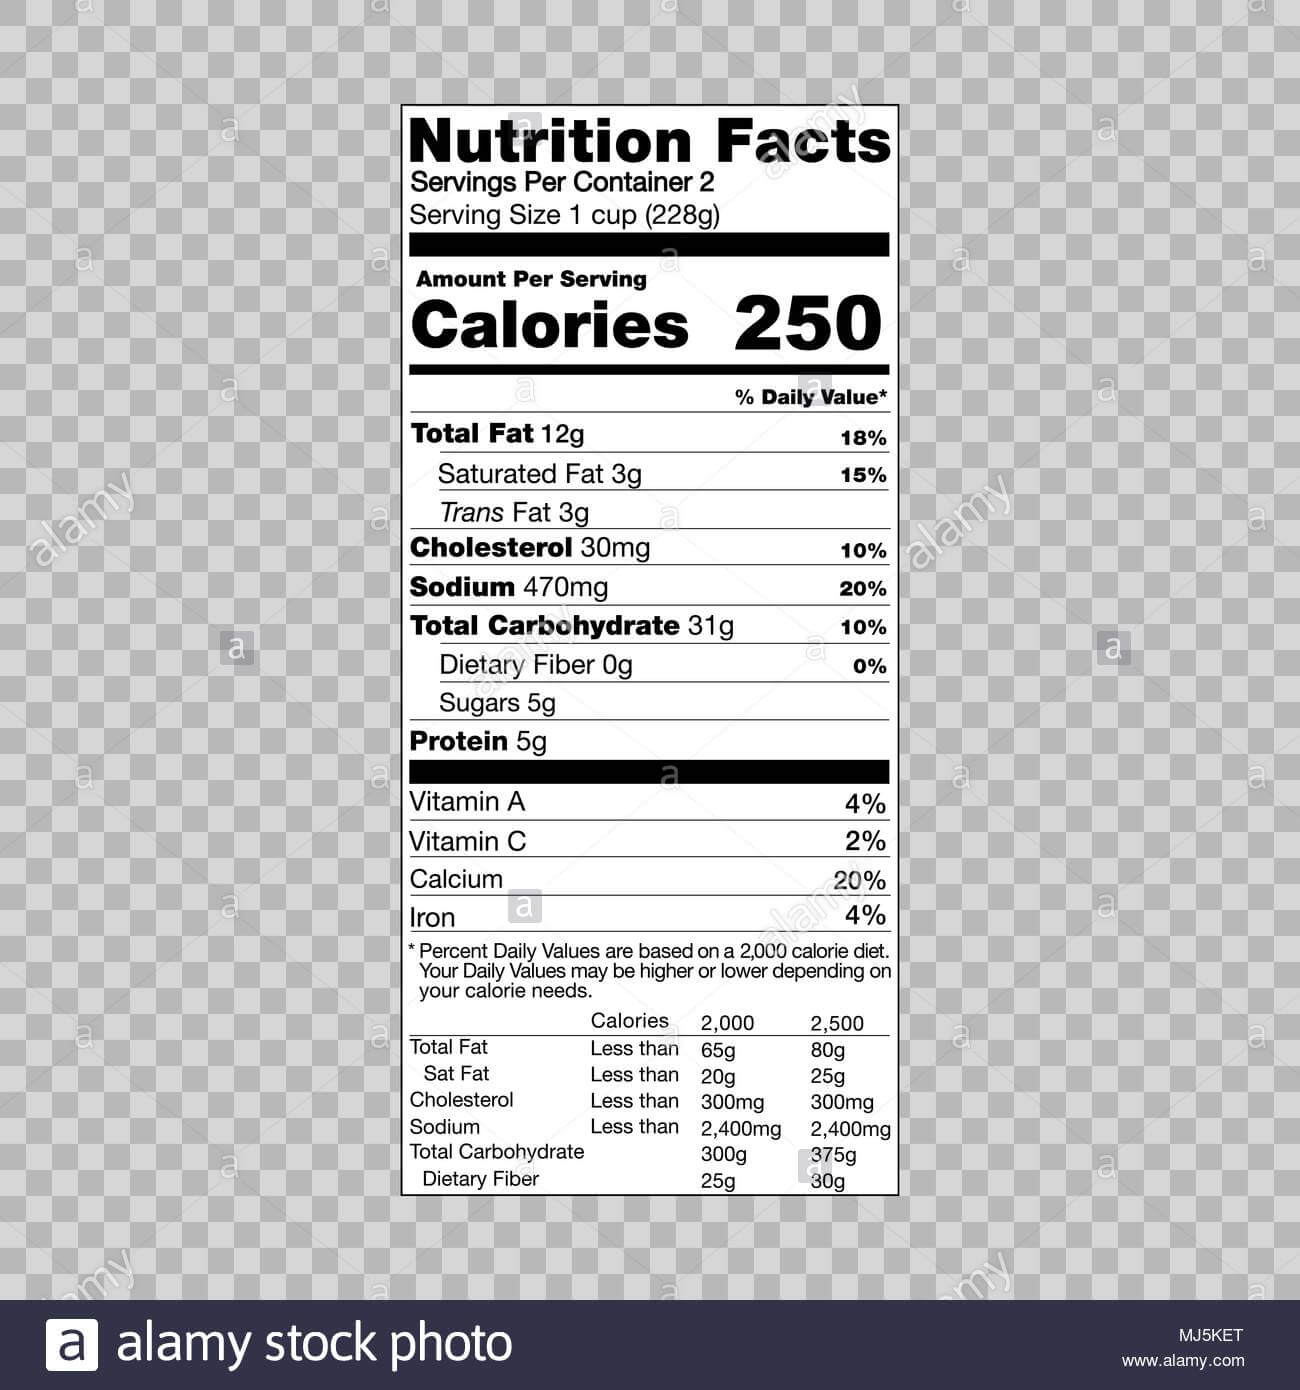 Nutrition Facts Information Template For Food Label Stock Throughout Blank Food Label Template